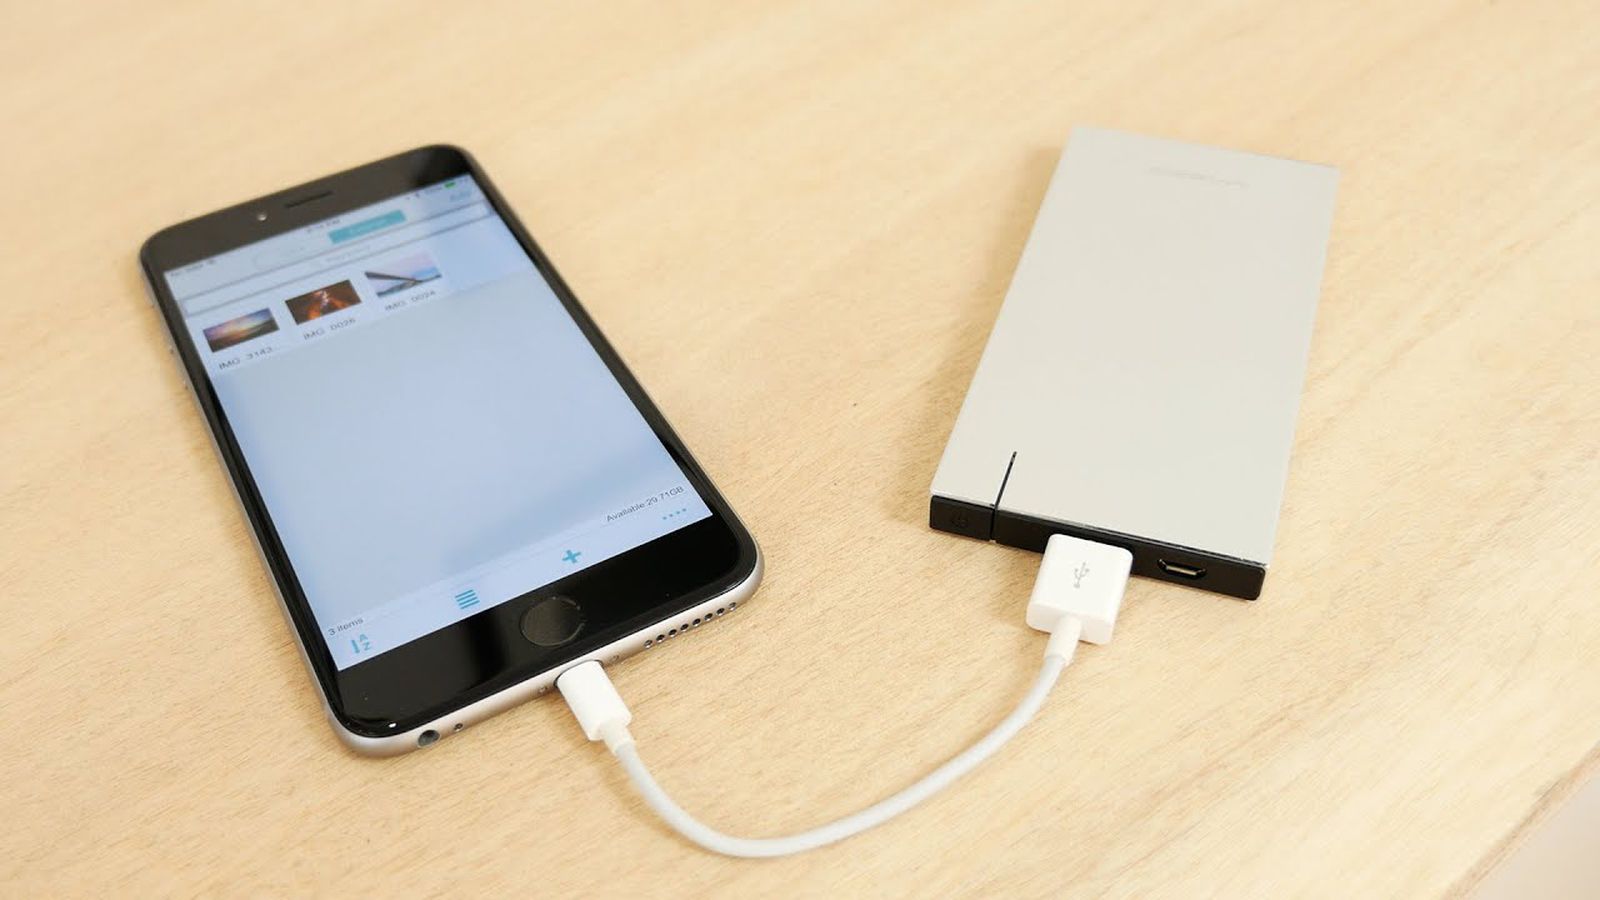 PowerDrive Slim Video Review: An External Battery and Hard Drive Combo for iPhone